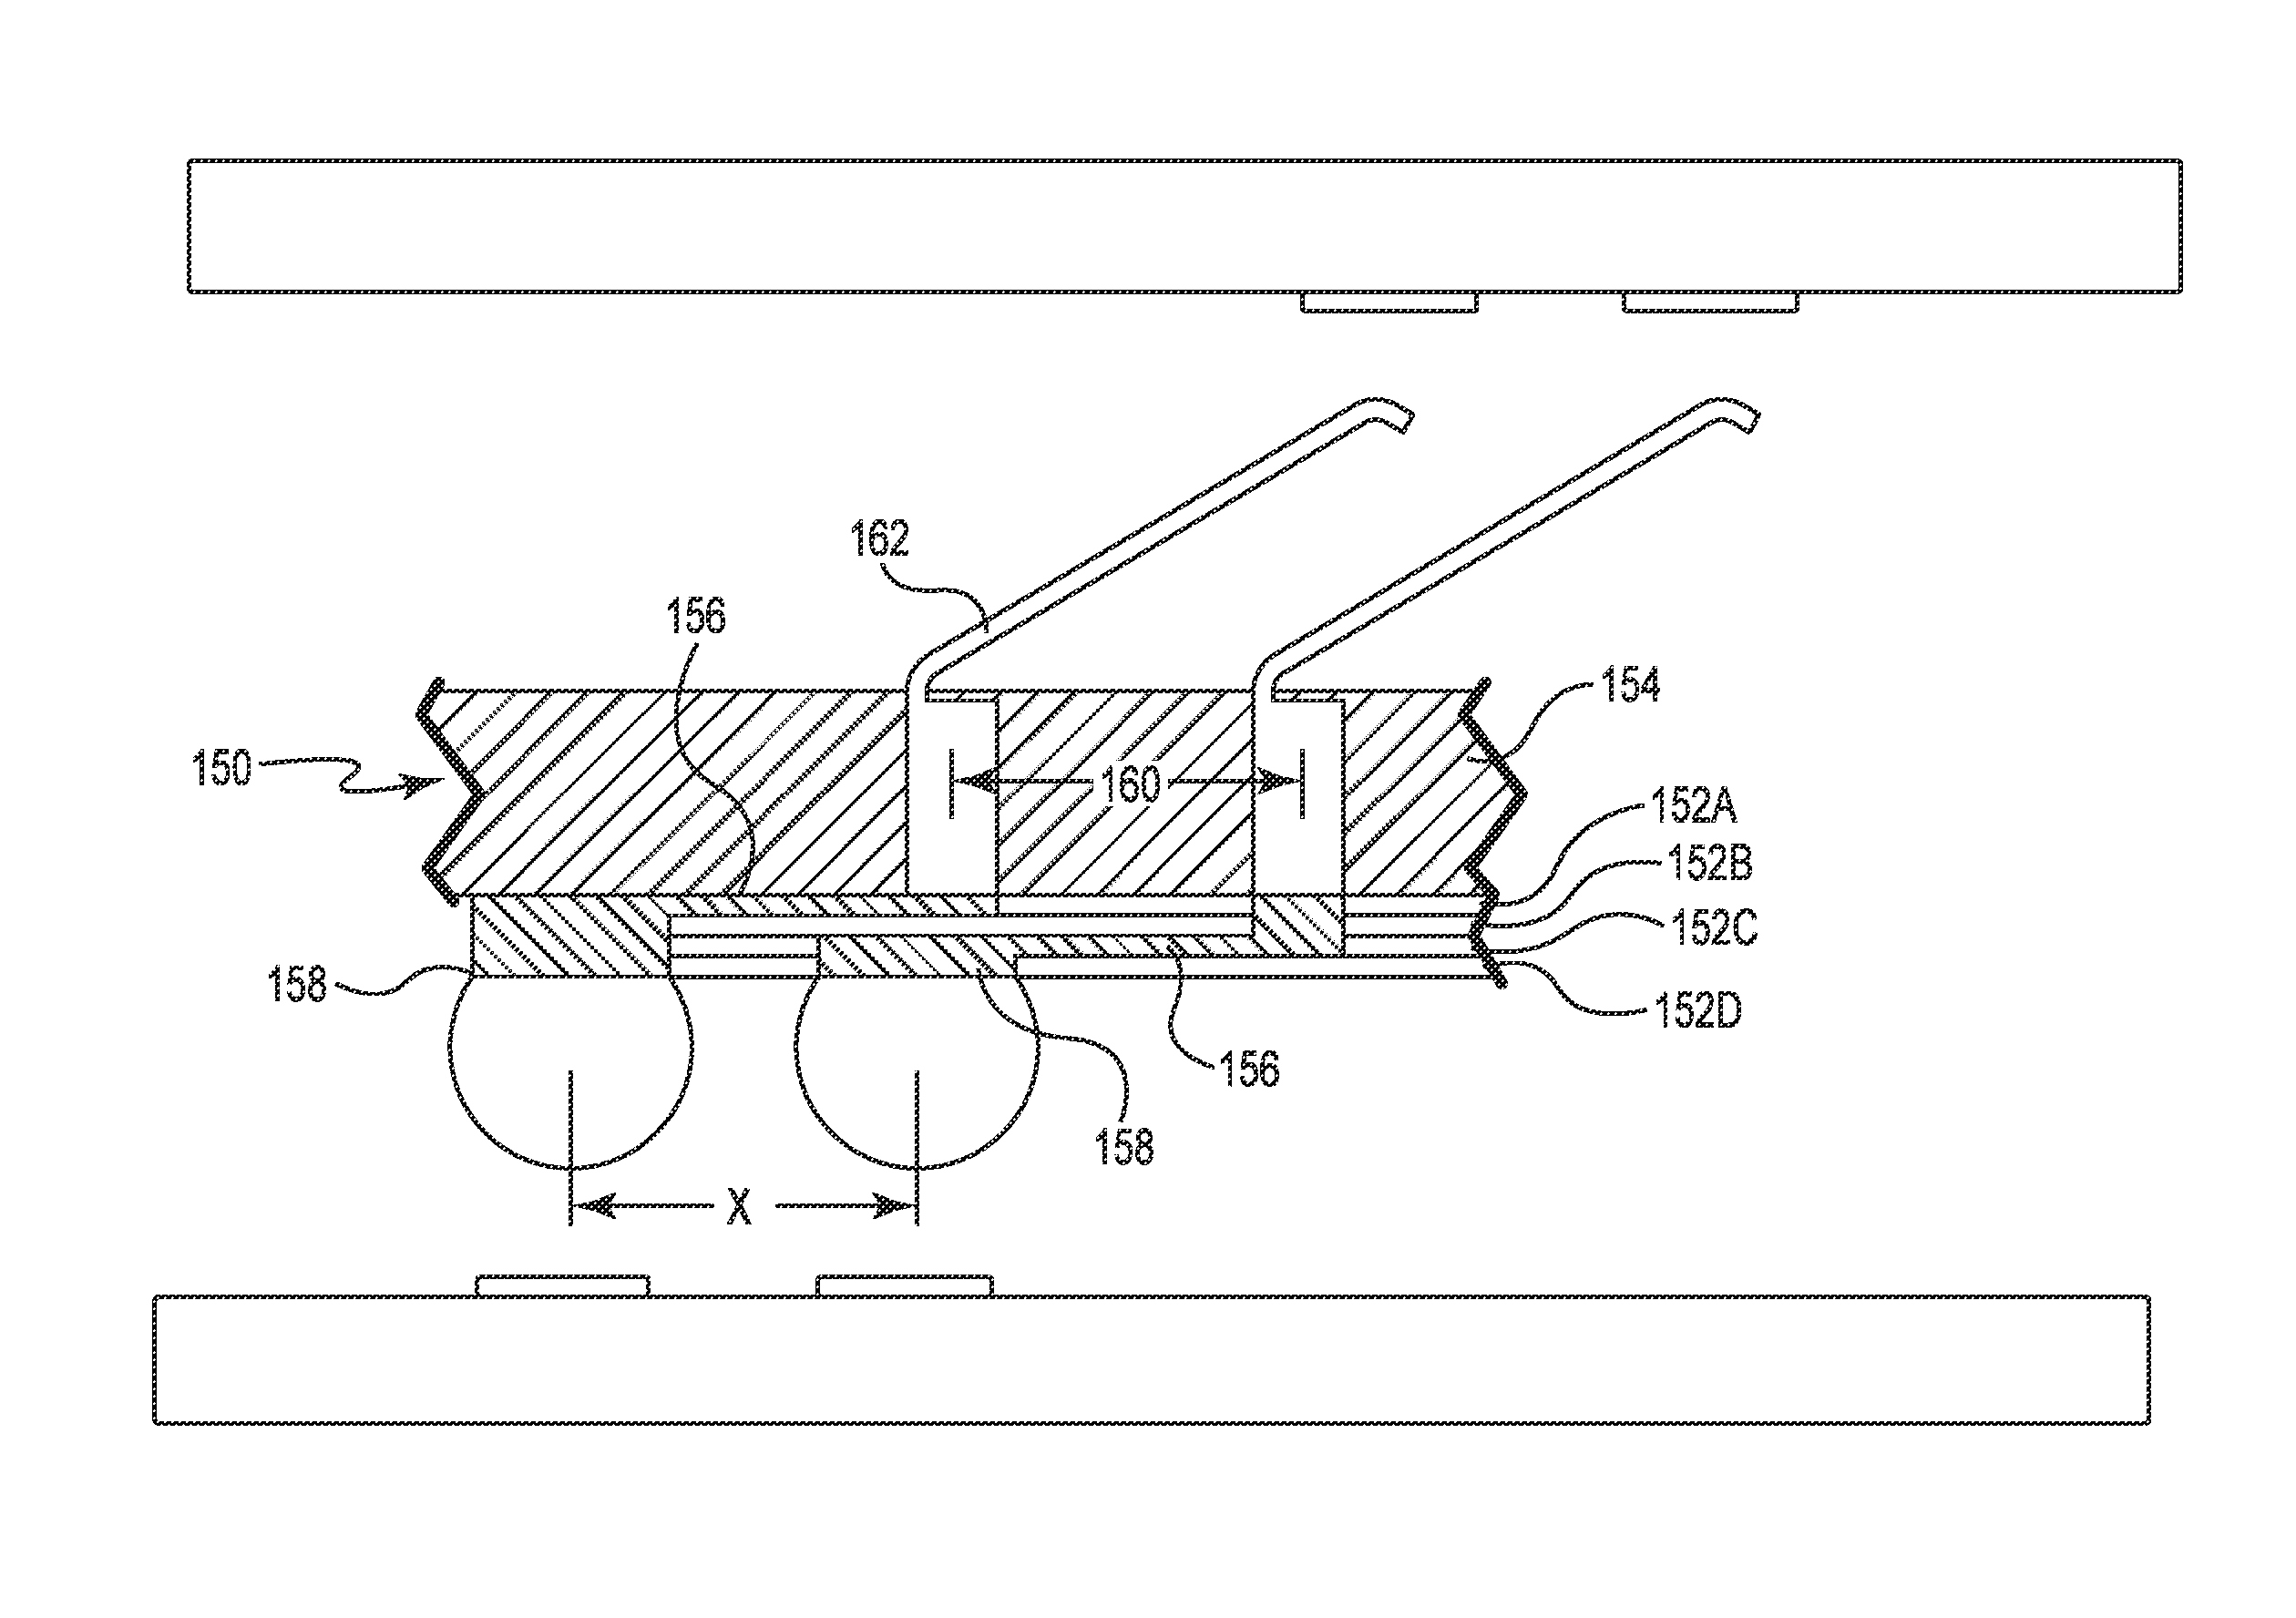 Method of forming a semiconductor socket